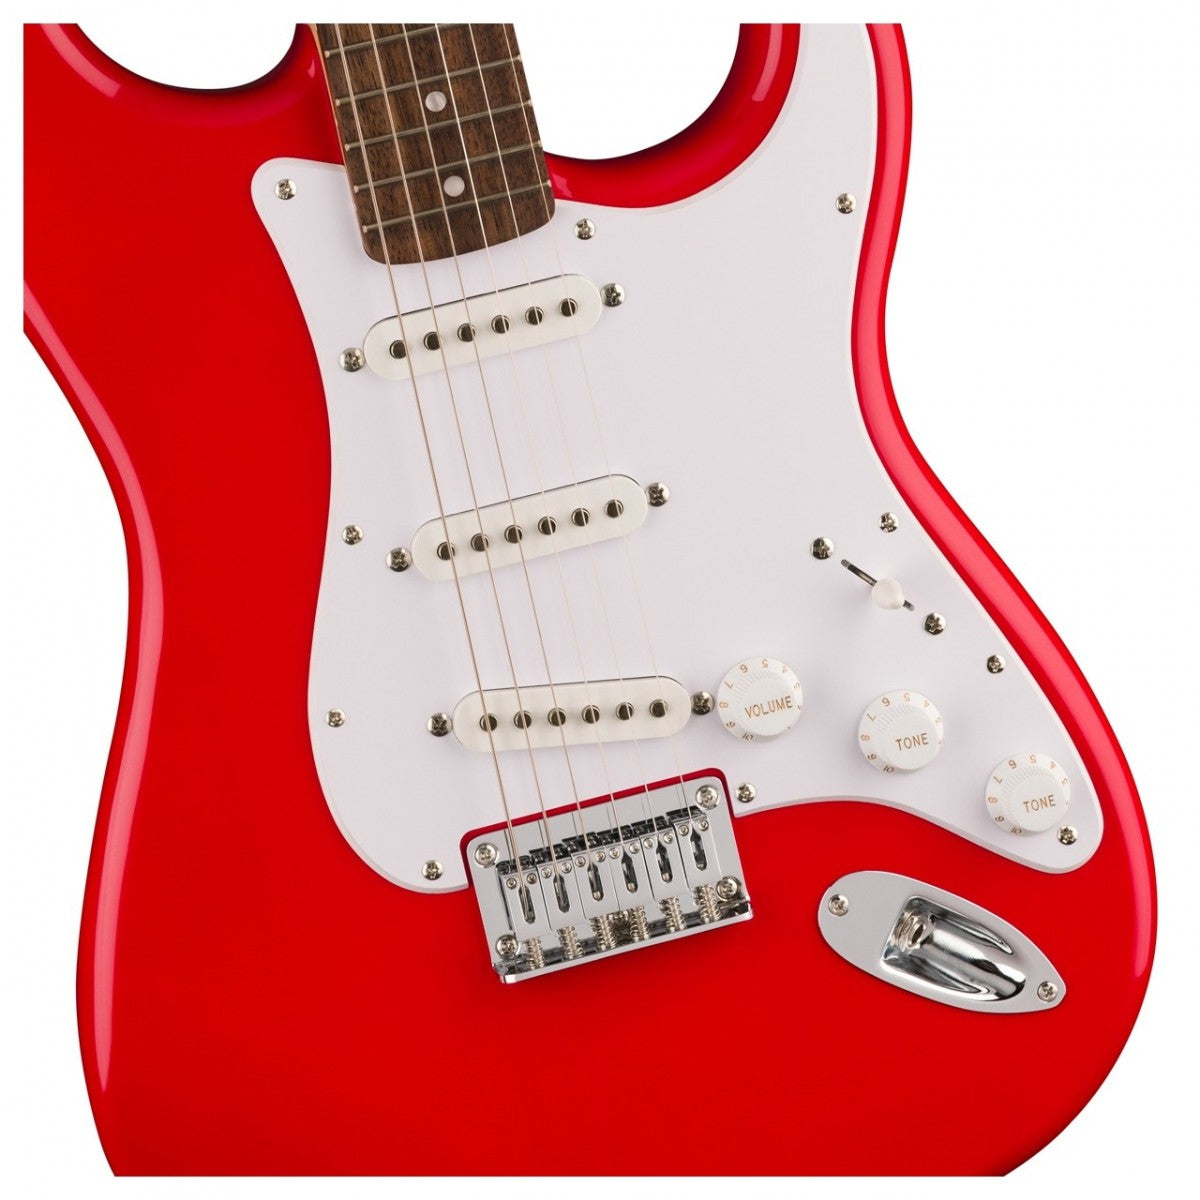 Squier Sonic Stratocaster Hardtail - Torino Red